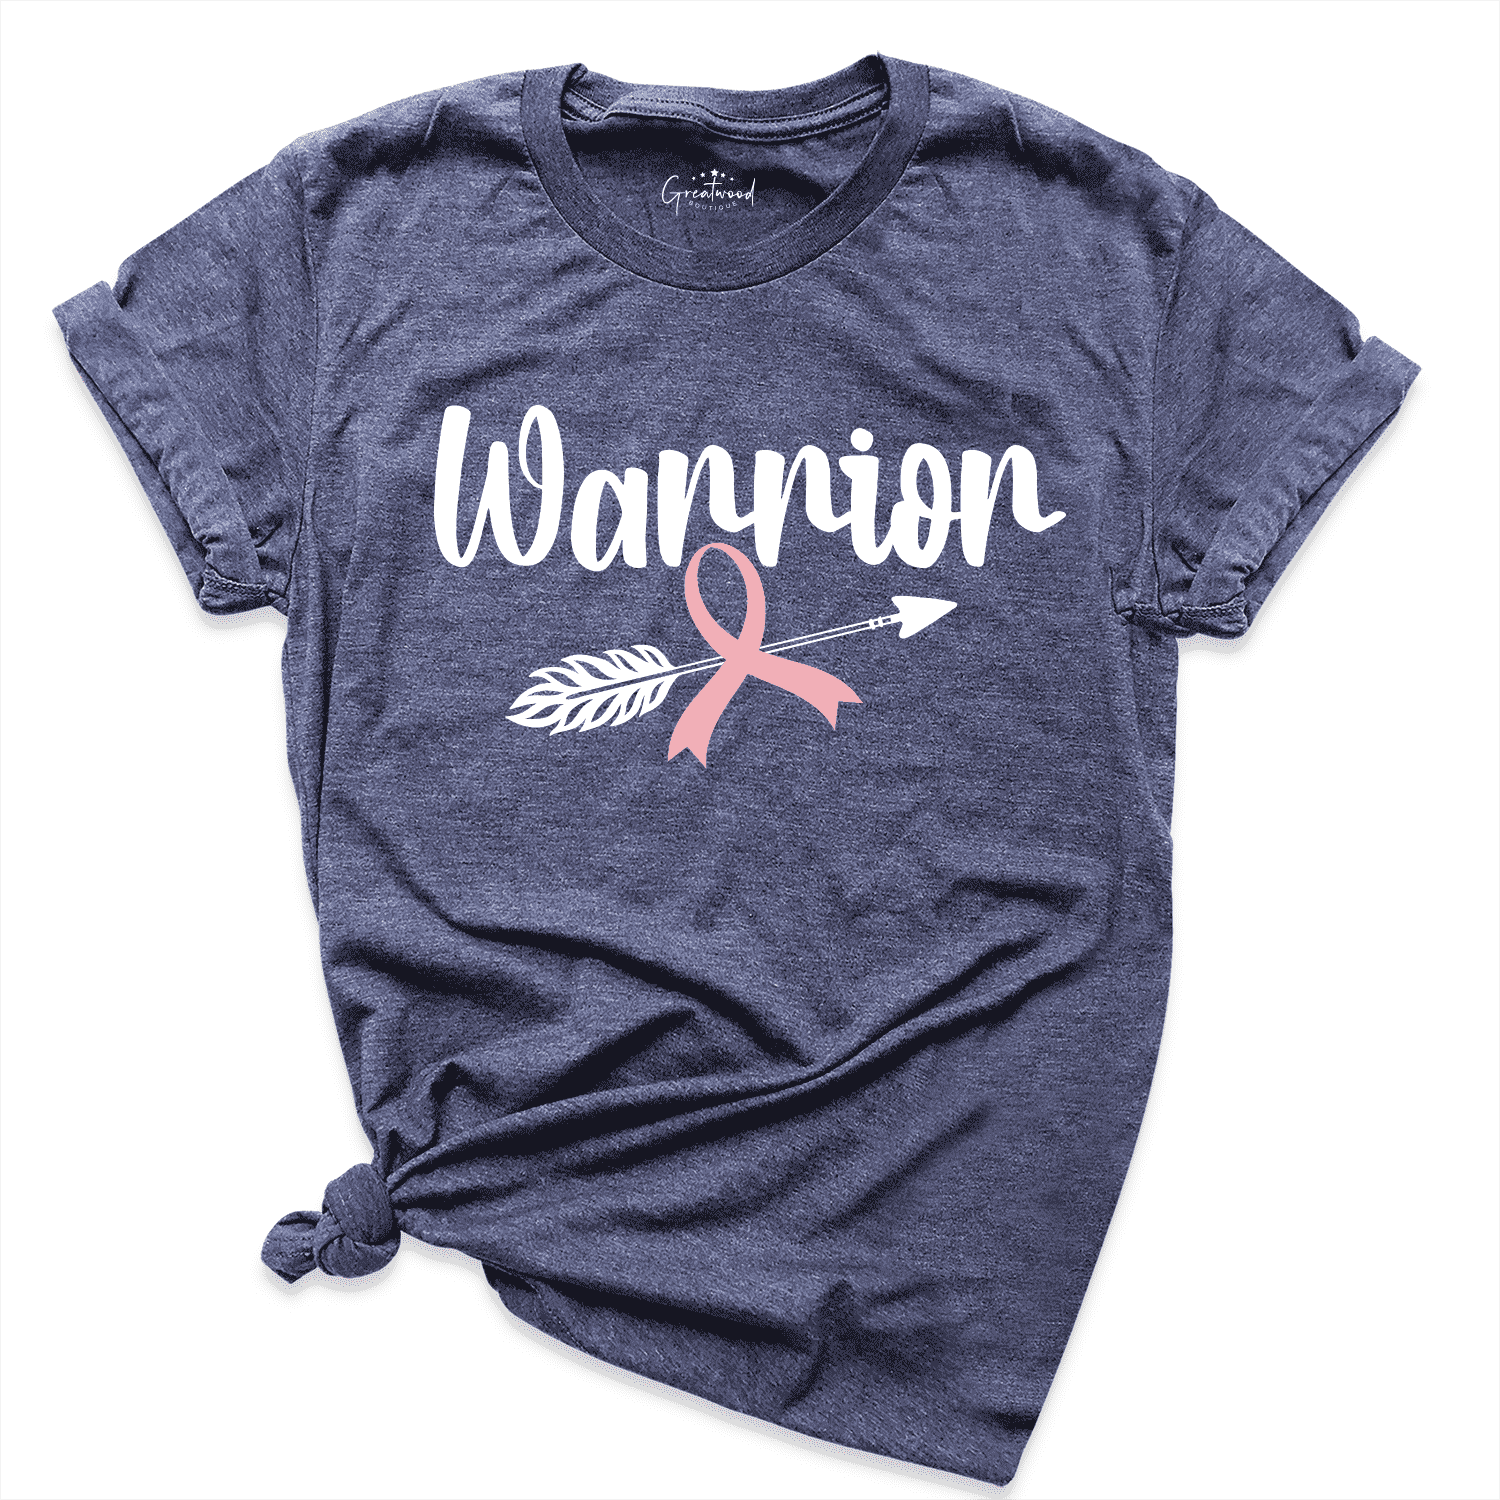 Warrior Shirt Navy - Greatwood Boutique